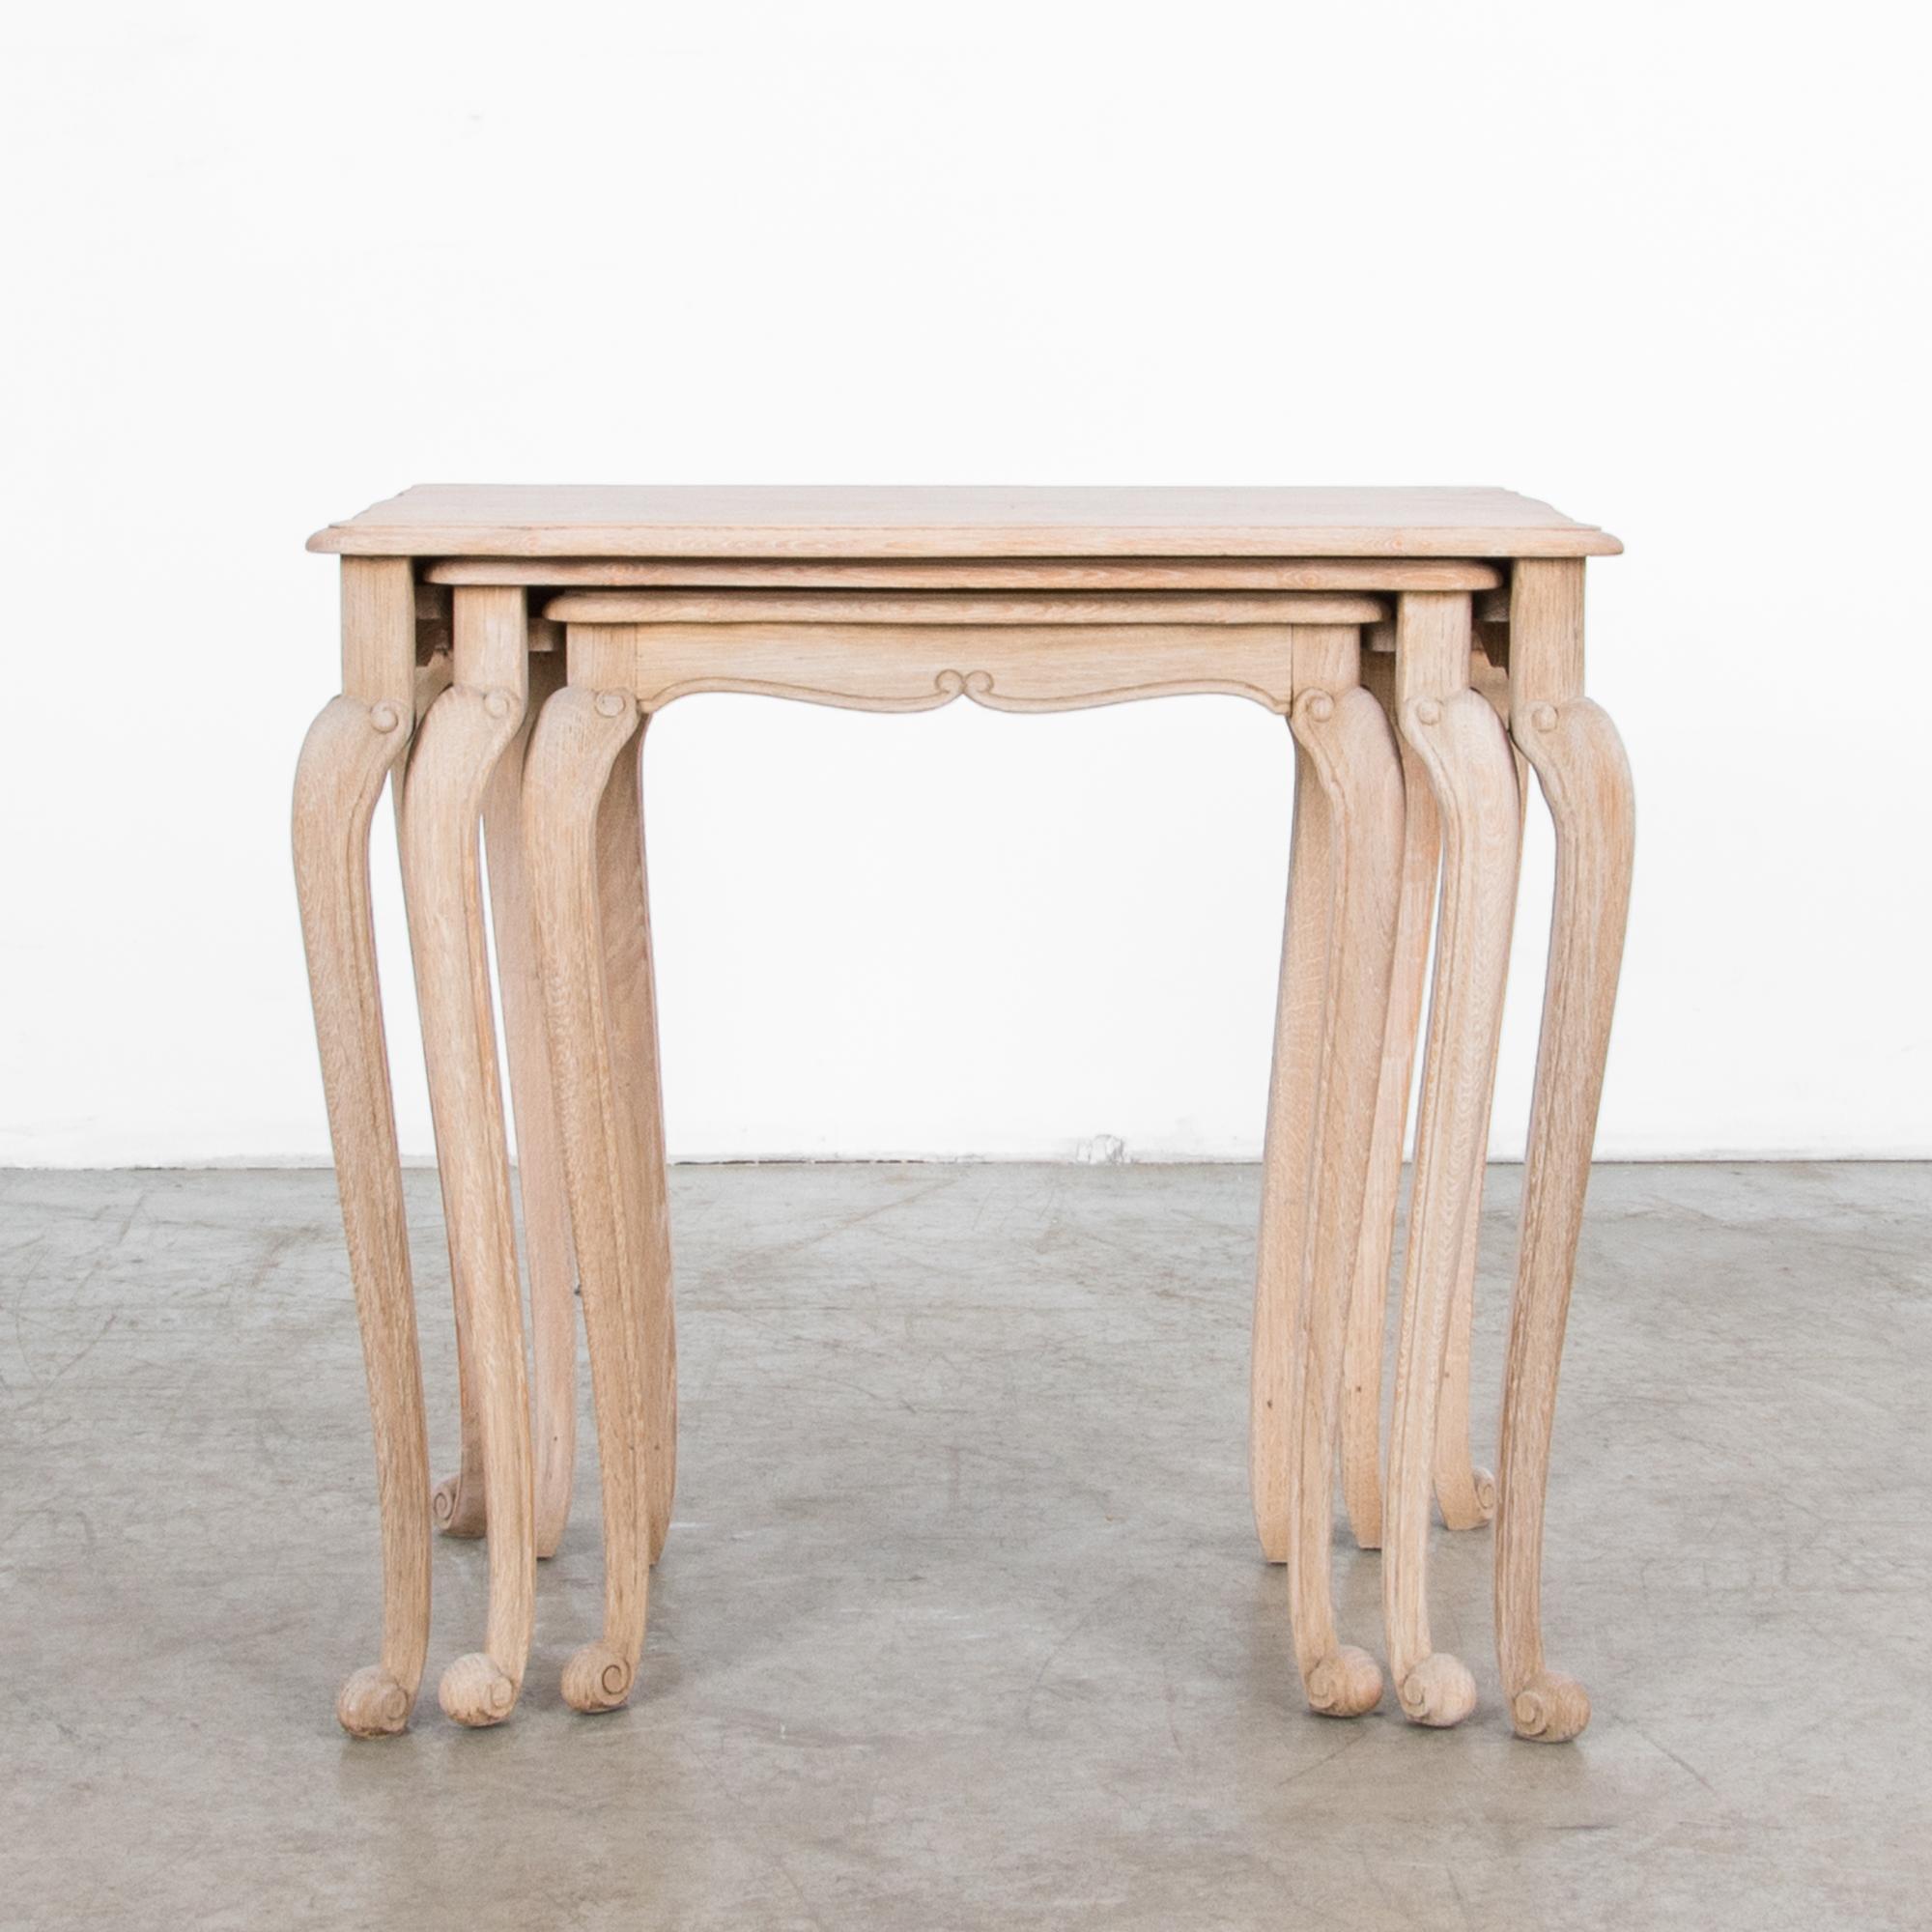 Made of bleached oak, this set of three nesting tables hails from Belgium, circa 1950. Slender cabriole legs feature a subtle scroll, supporting an embellished tabletop with a graceful symmetrical apron. The understated finish of the wood gives